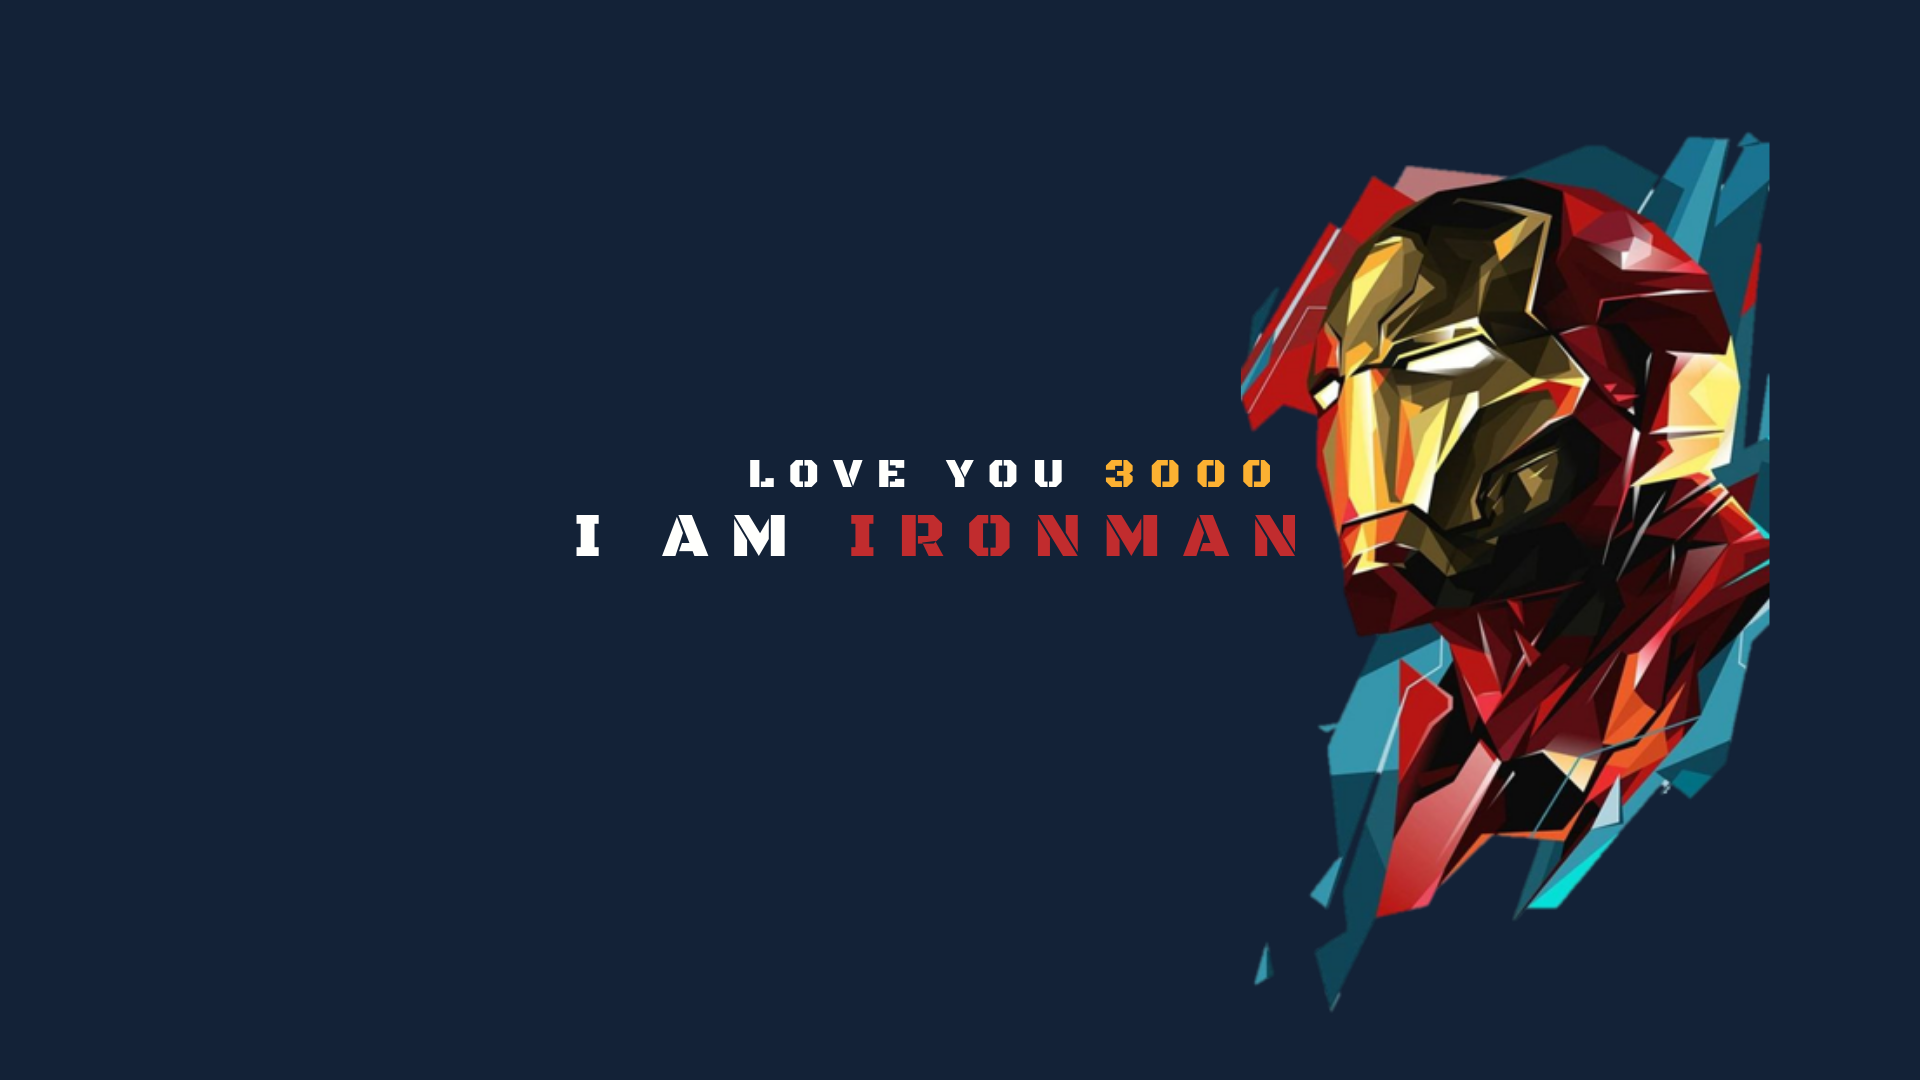 Iron Man And Iron Spider Man Love You 3000 Wallpapers - Wallpaper Cave